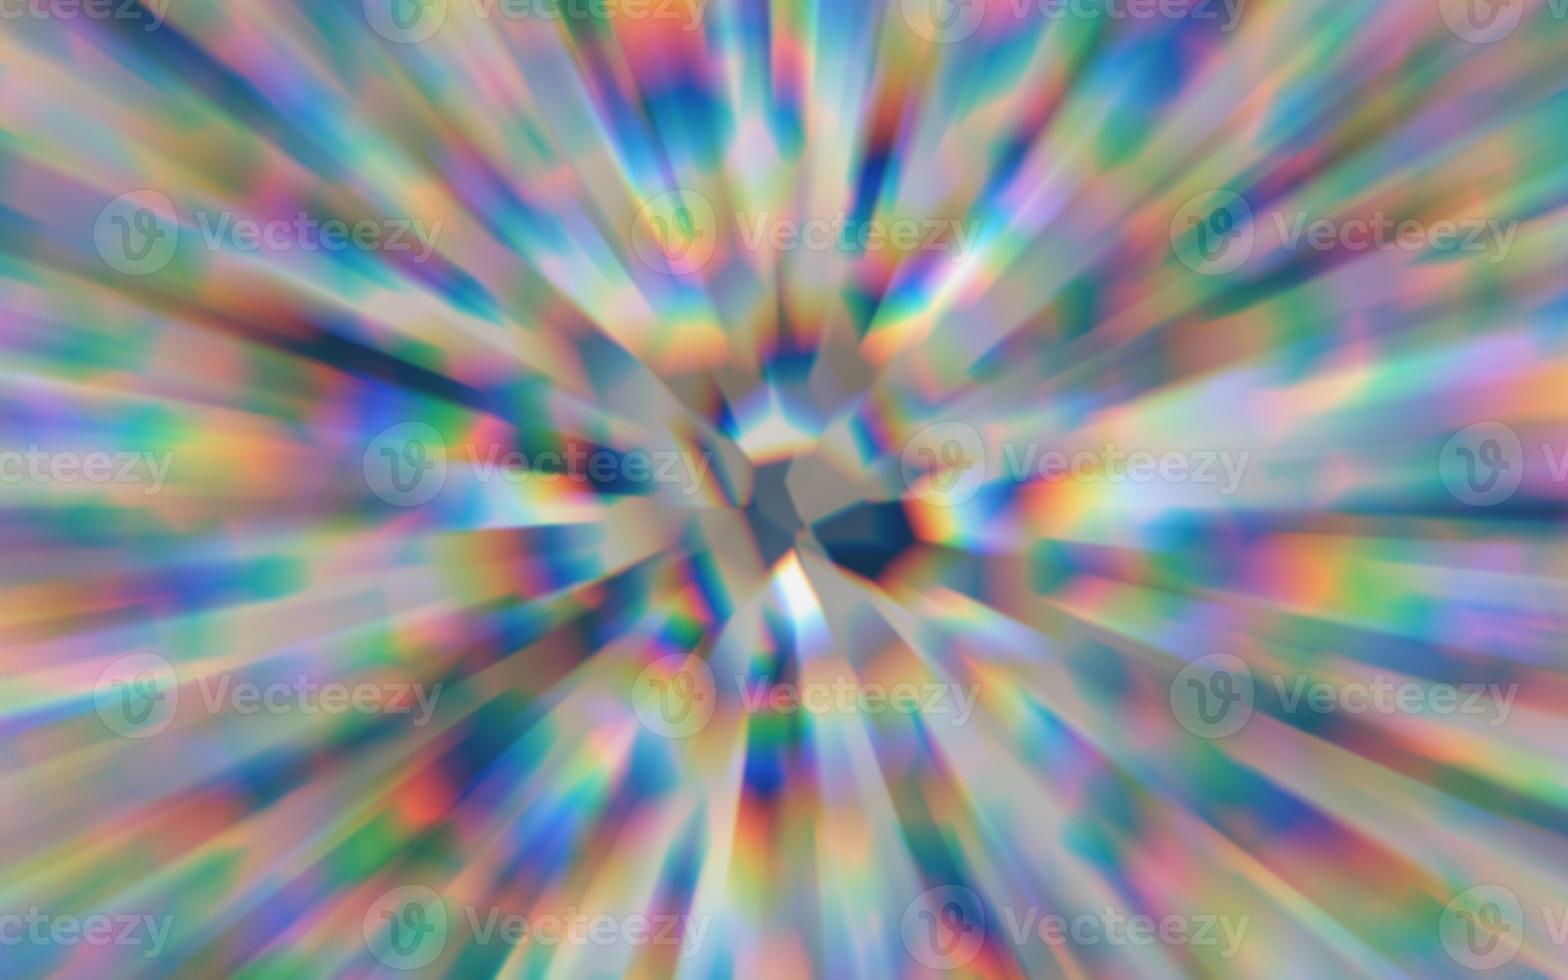 Beautiful blurred rainbow light refraction picture illustration background. Lens refraction effect. Colorful background design. Suitable for presentation background, book cover, poster, backdrop, etc. photo